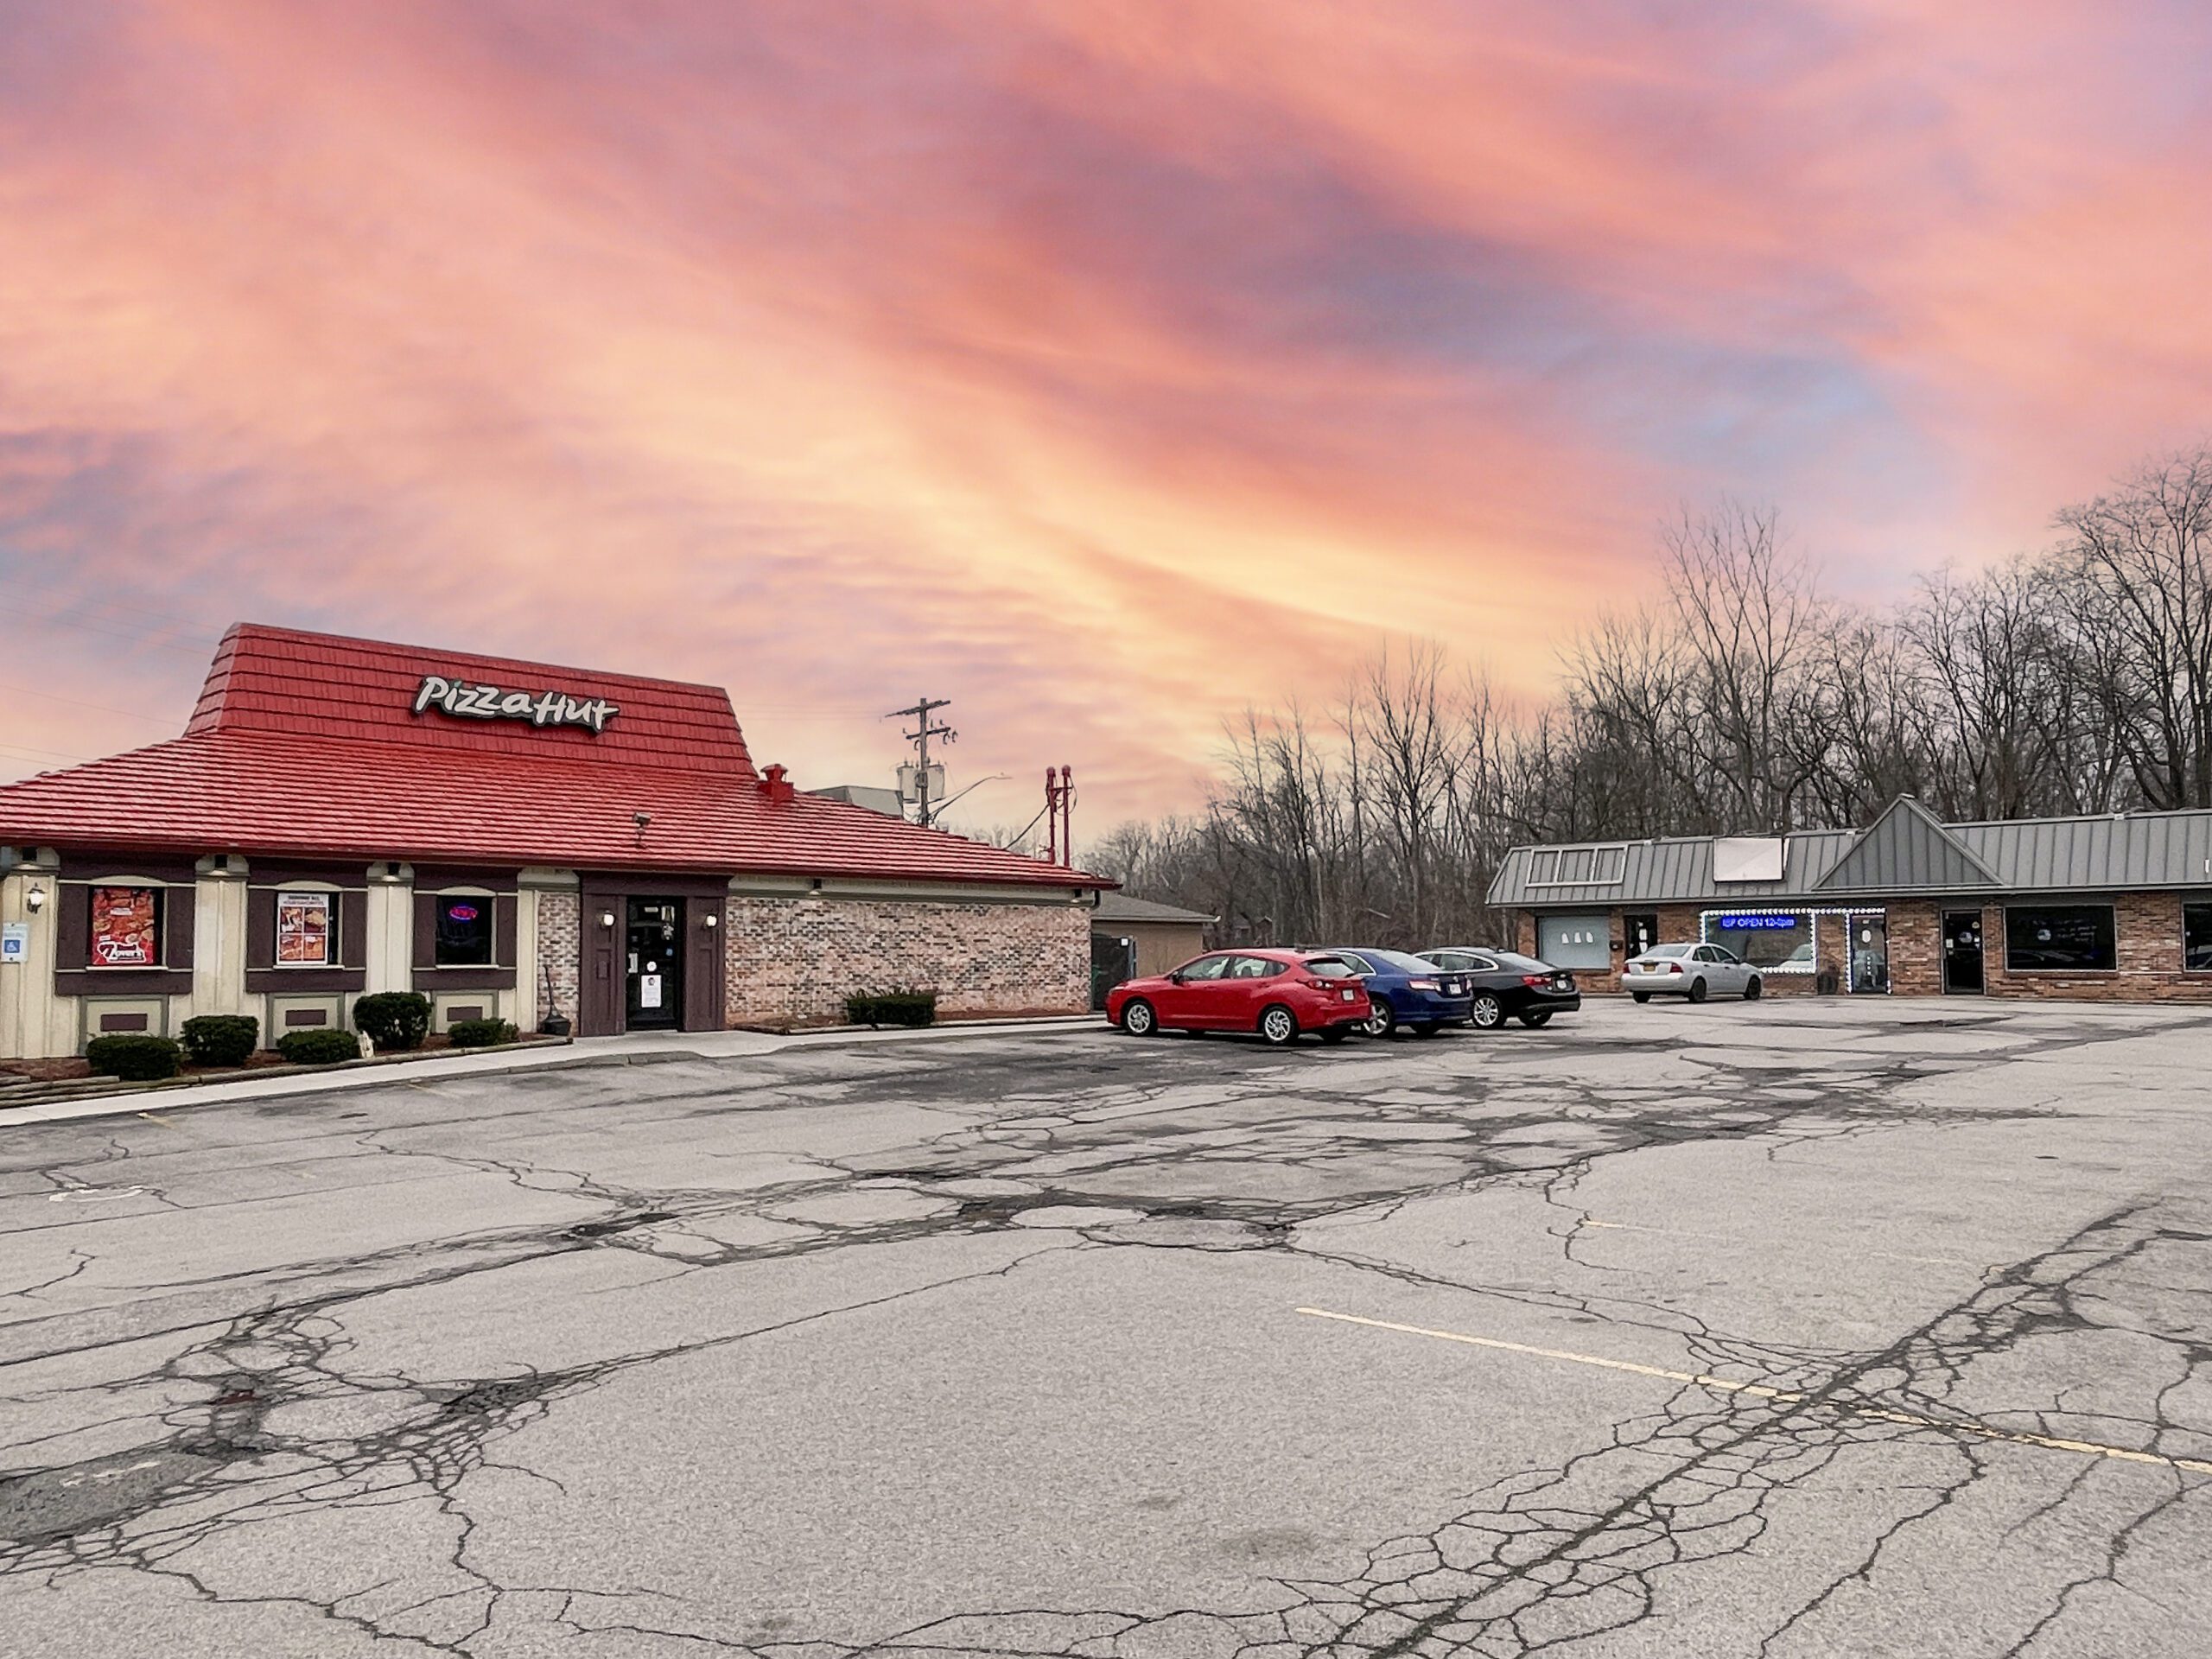 Brick Pizza Hut with cars in front